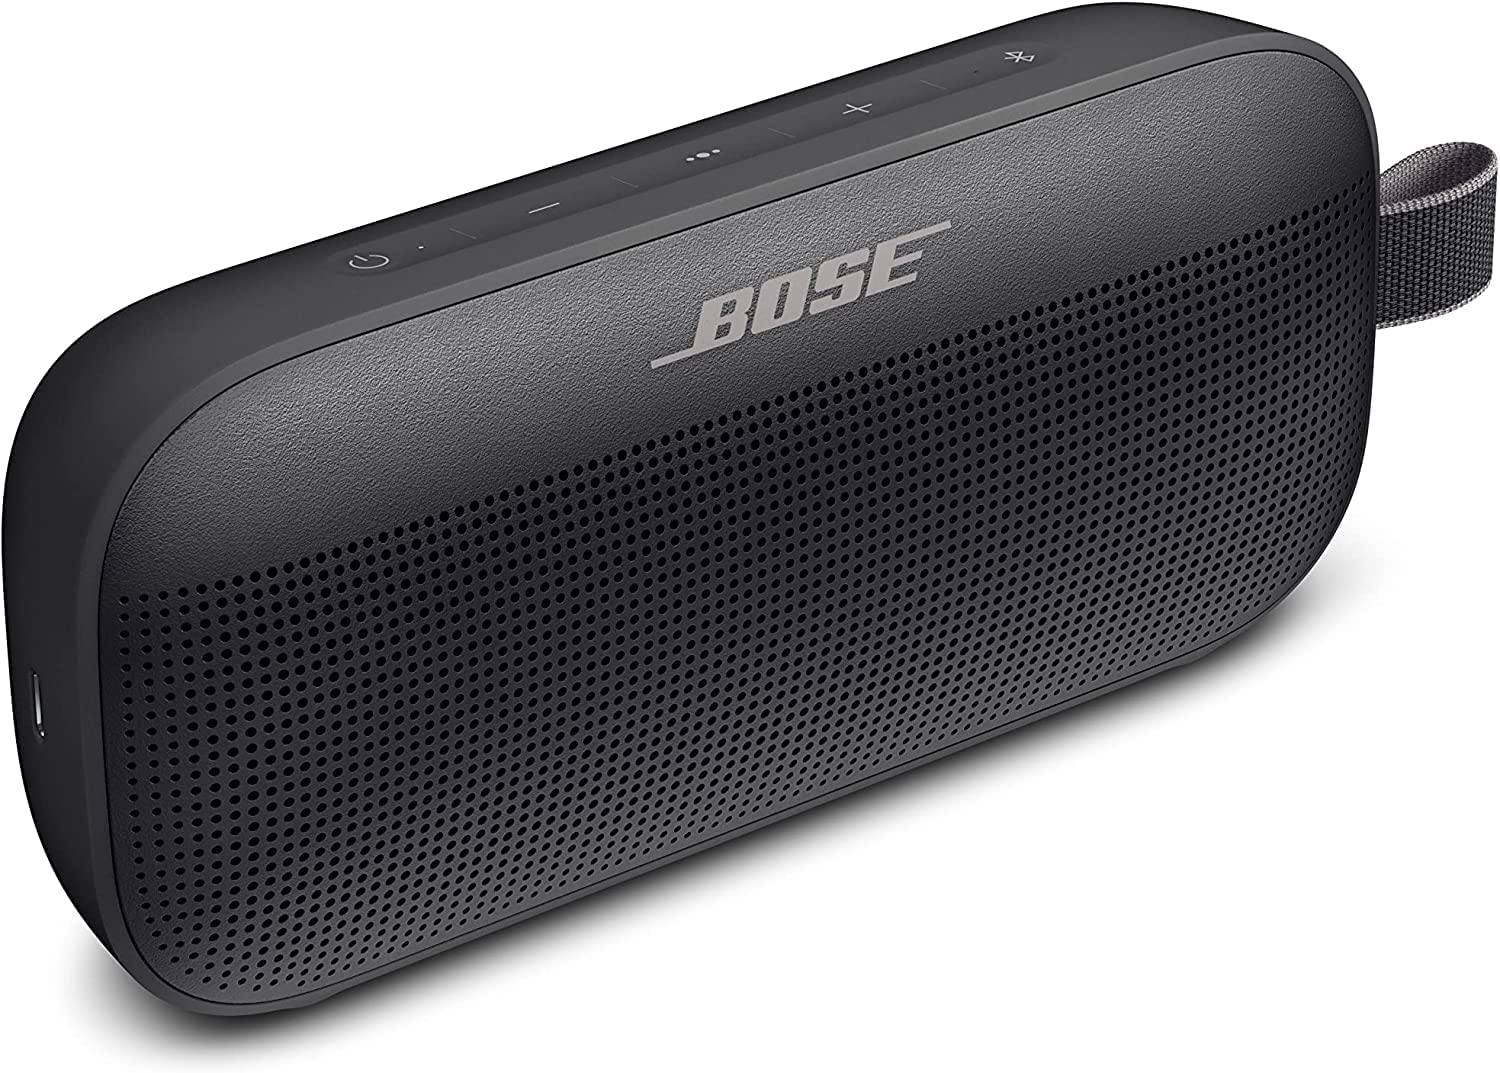 Bose Portable Bluetooth Speakers Are on Sale!